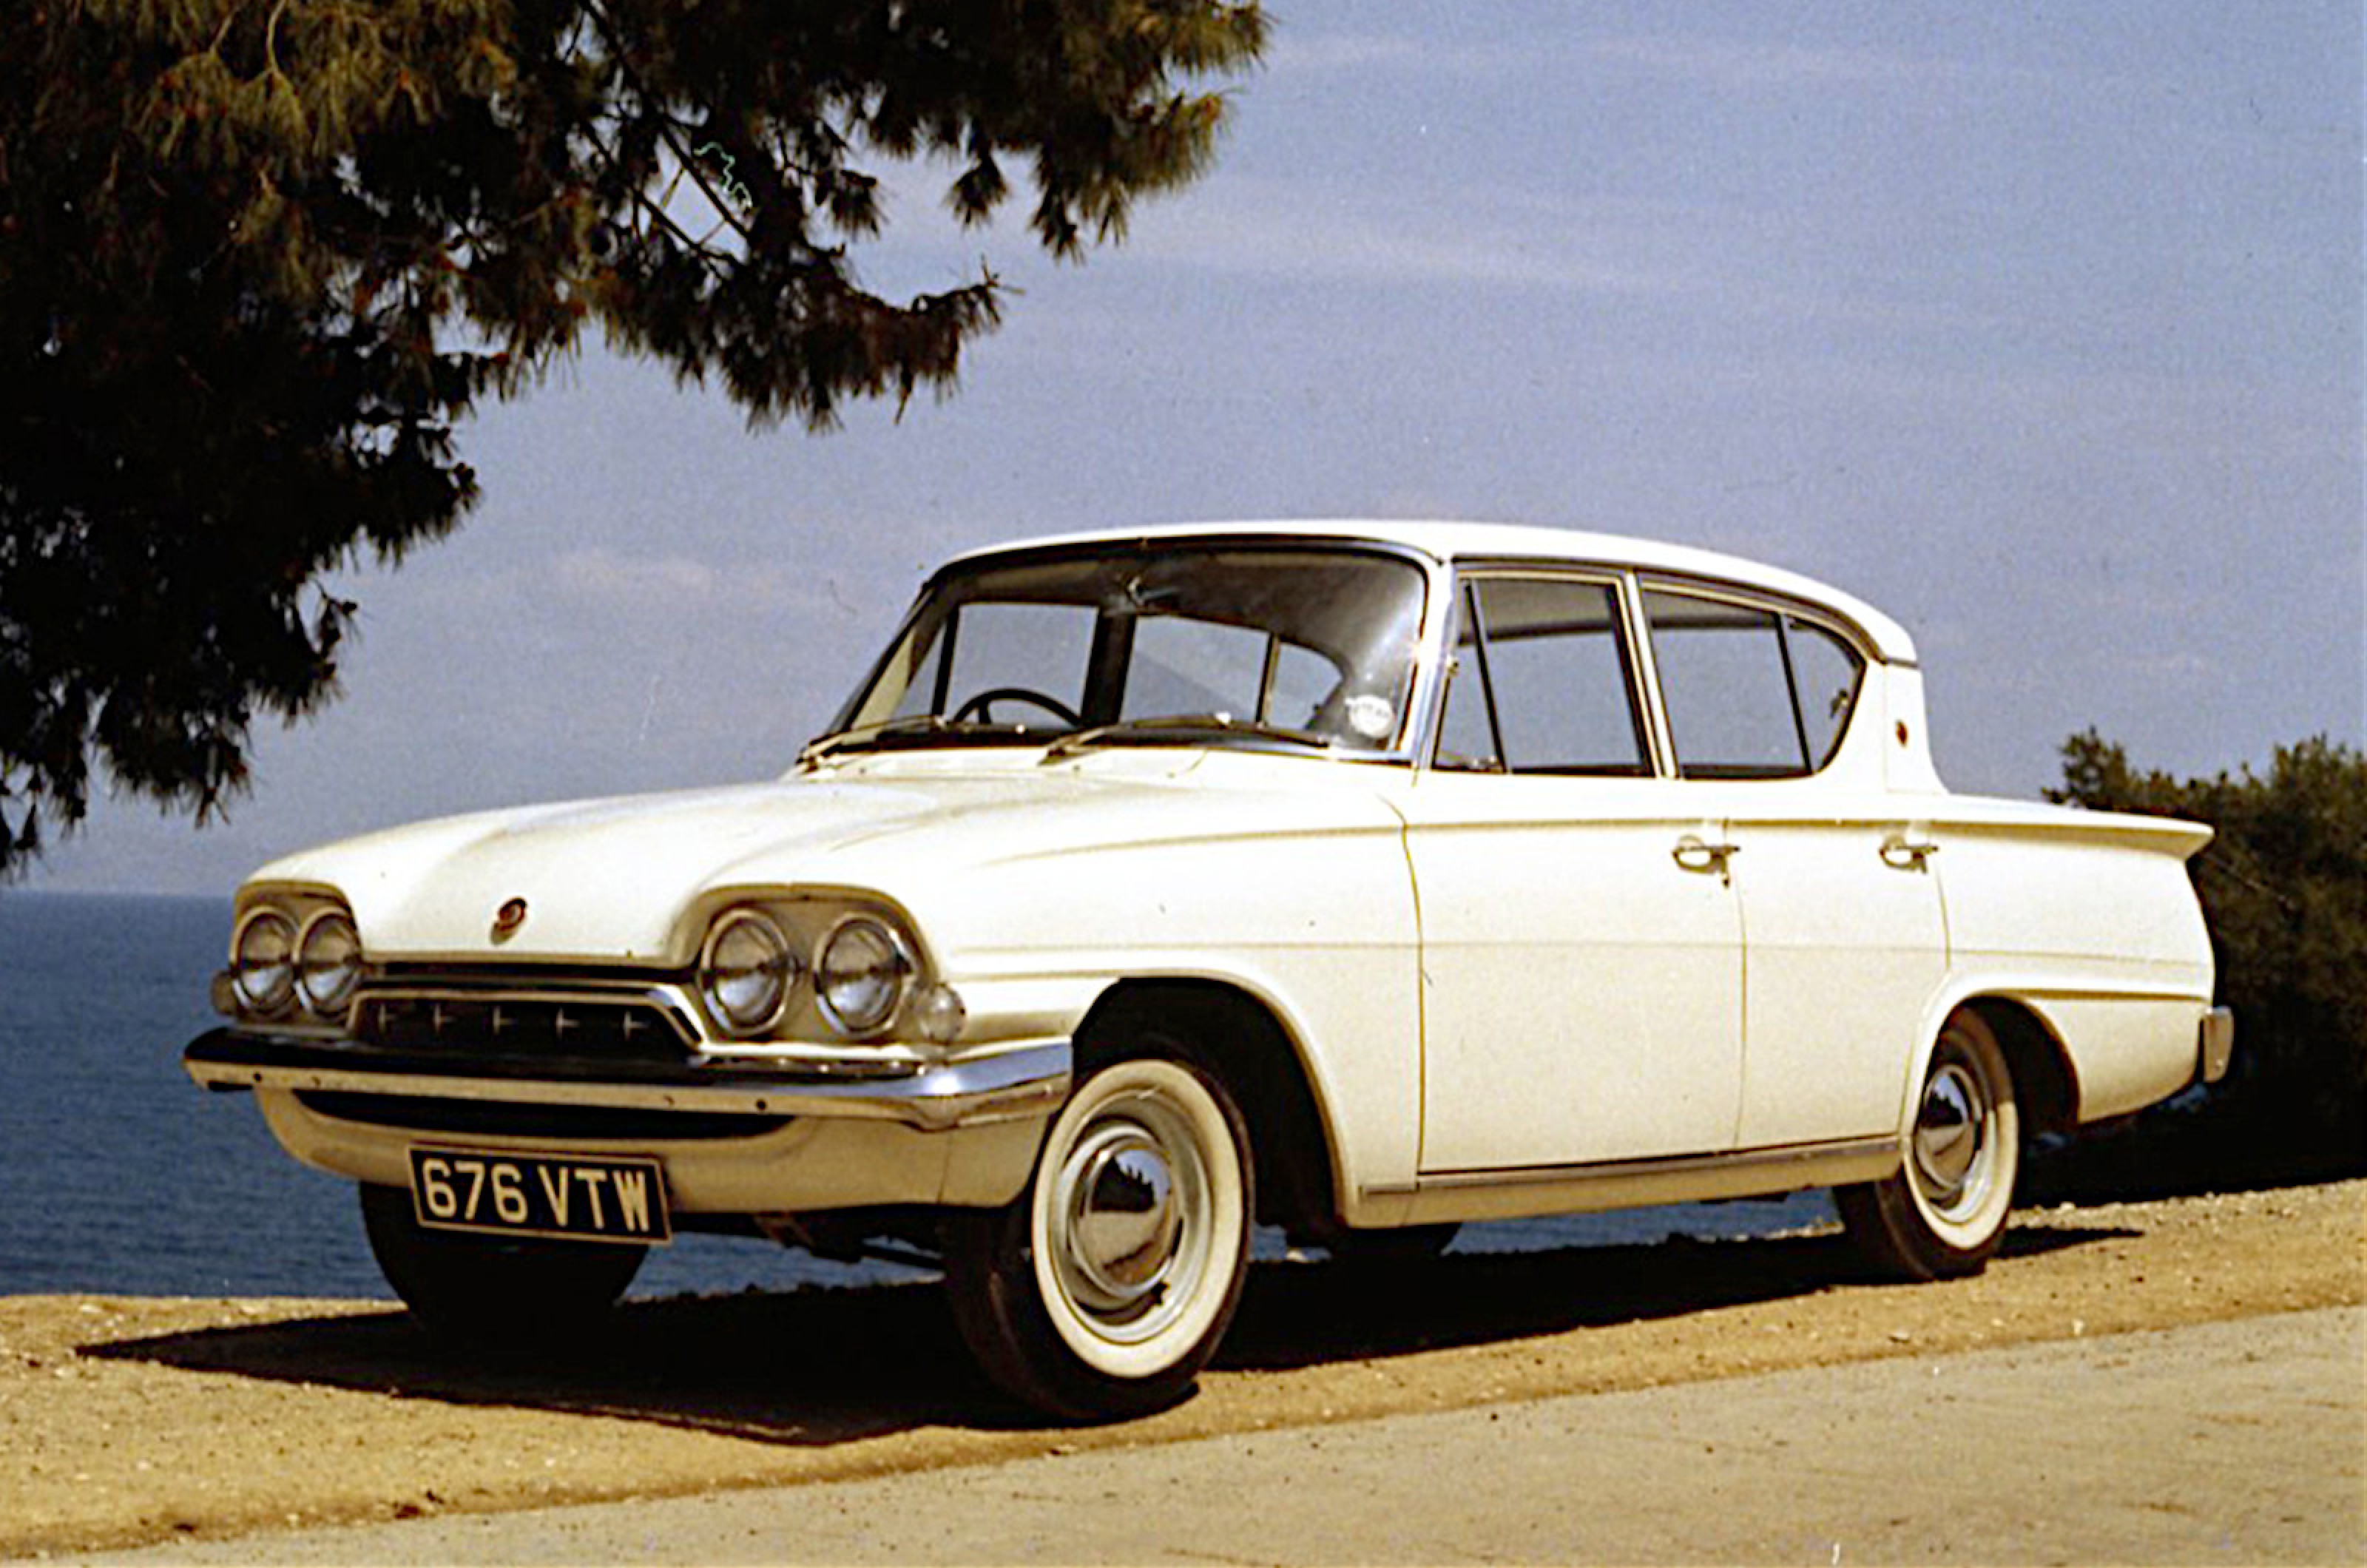 <p>The strangest-looking British Ford of the 1960s was easily distinguishable from the slightly earlier Anglia, except for the fact that both cars had tailfins and reverse-angle rear windows.</p>  <p>They also had luggage compartments which, in the American fashion, were very long, a fact accentuated by the orientation of their rear windows.</p>  <p>The effect was greater on the Classic, which had a similar overhang to the Anglia at the front, but a much longer one at the back.</p>  <p>The coupe version, the first Ford to be named Capri, was similarly odd, but more conventional in the single sense that its rear window sloped in the usual direction.</p>